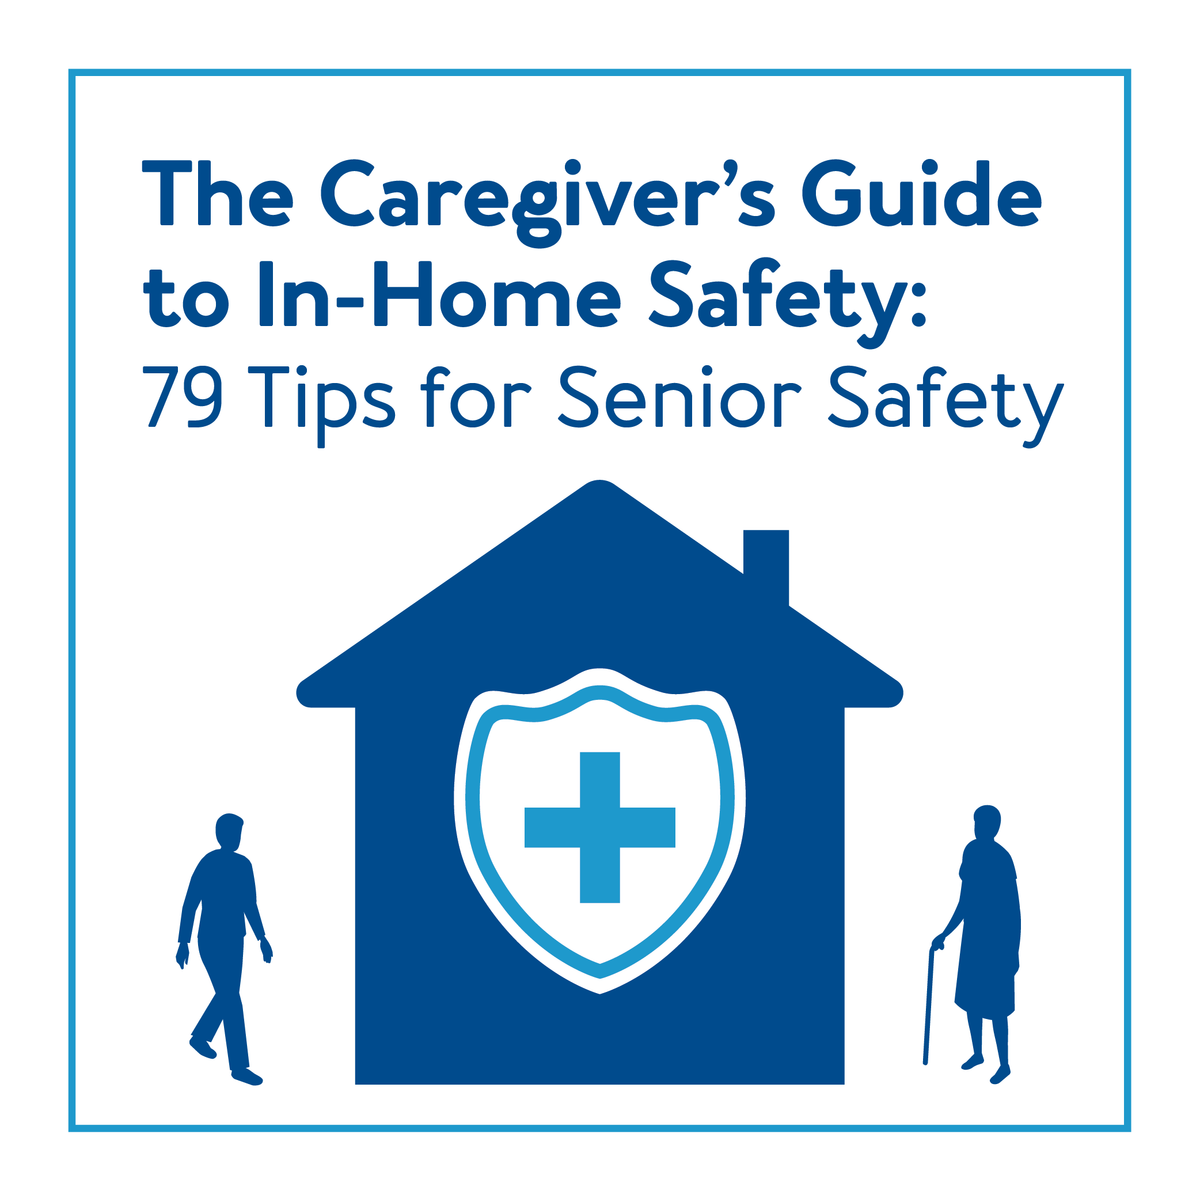 Home graphic with two outlines of people, text The Caregiver’s Guide to In-Home Safety: 79 Tips for Senior Safety